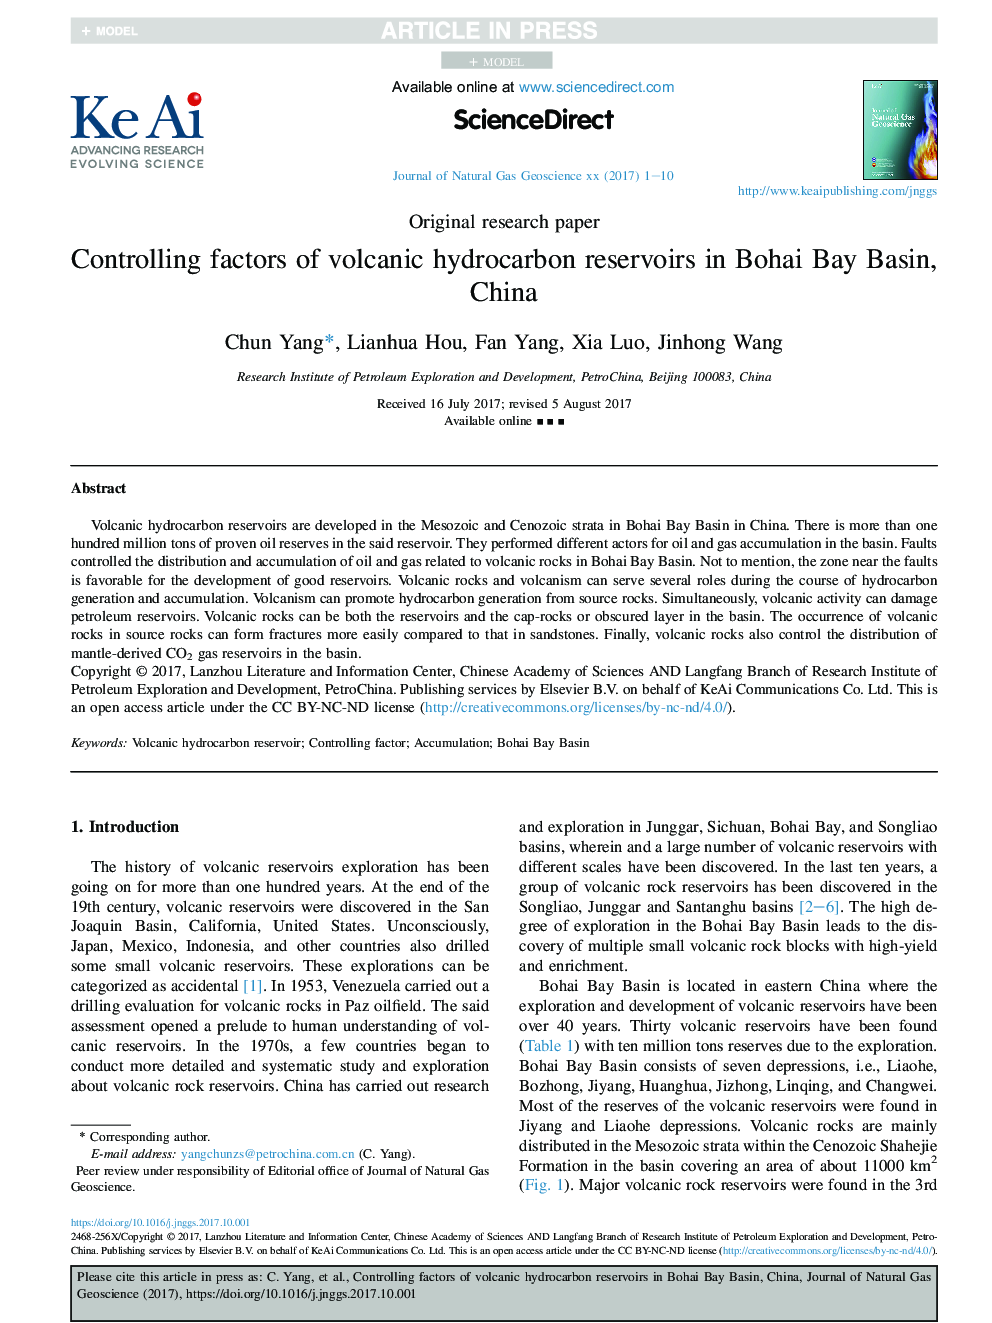 Controlling factors of volcanic hydrocarbon reservoirs in Bohai Bay Basin, China